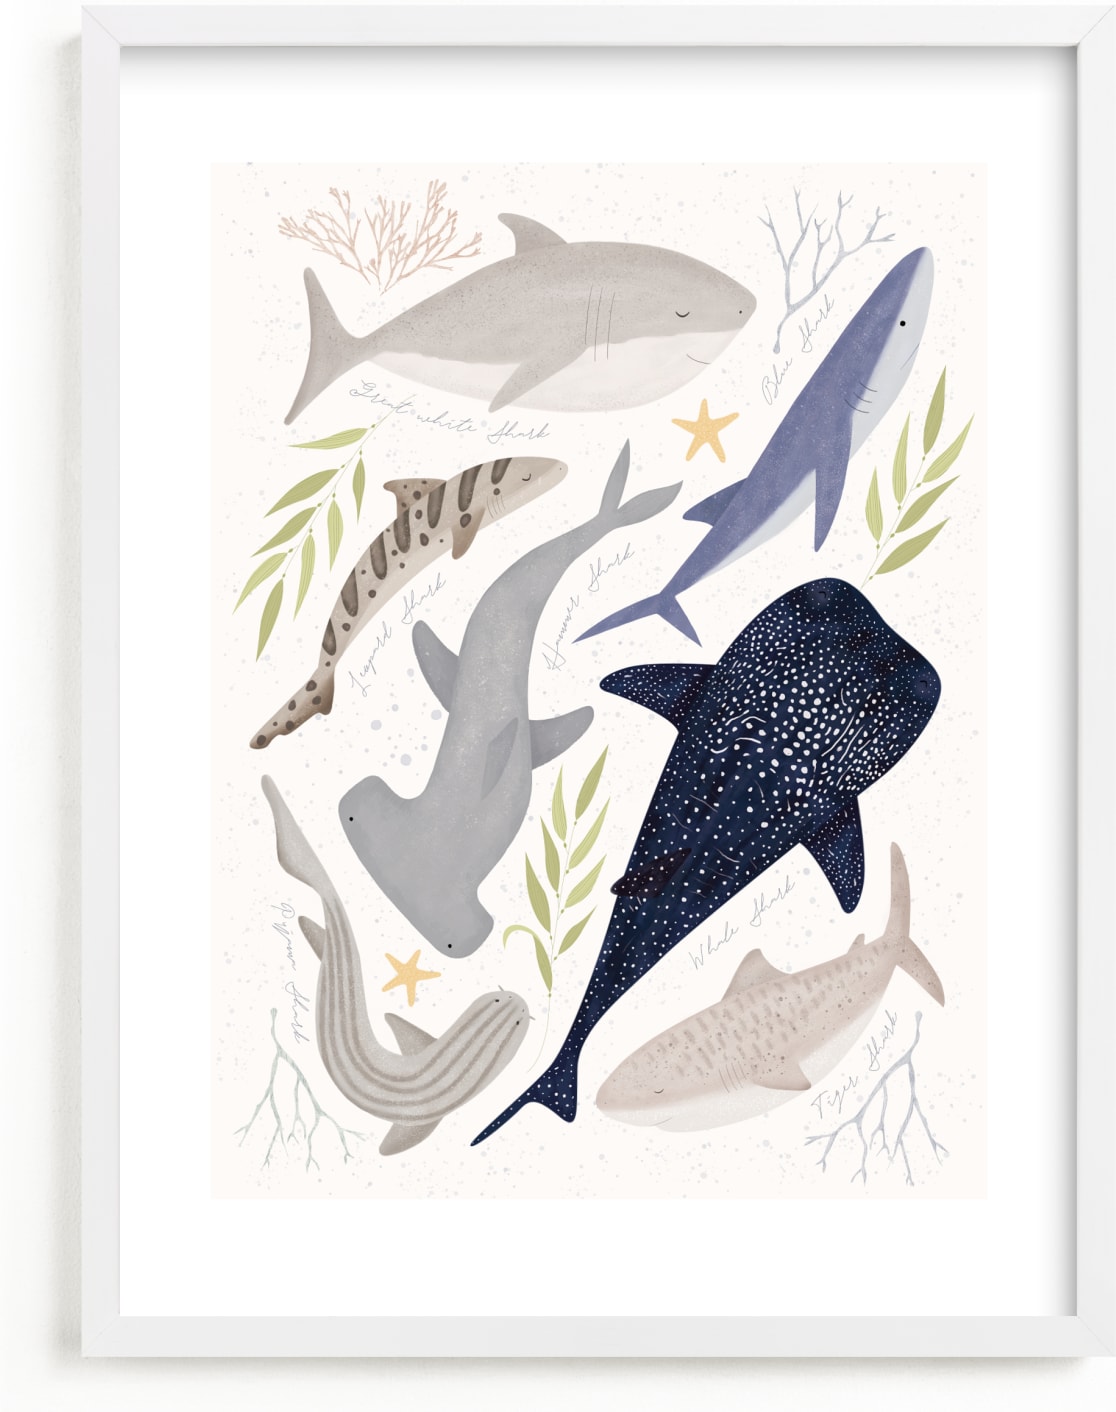 This is a blue, ivory, grey art by Sabrin Deirani called Marvelous sharks.